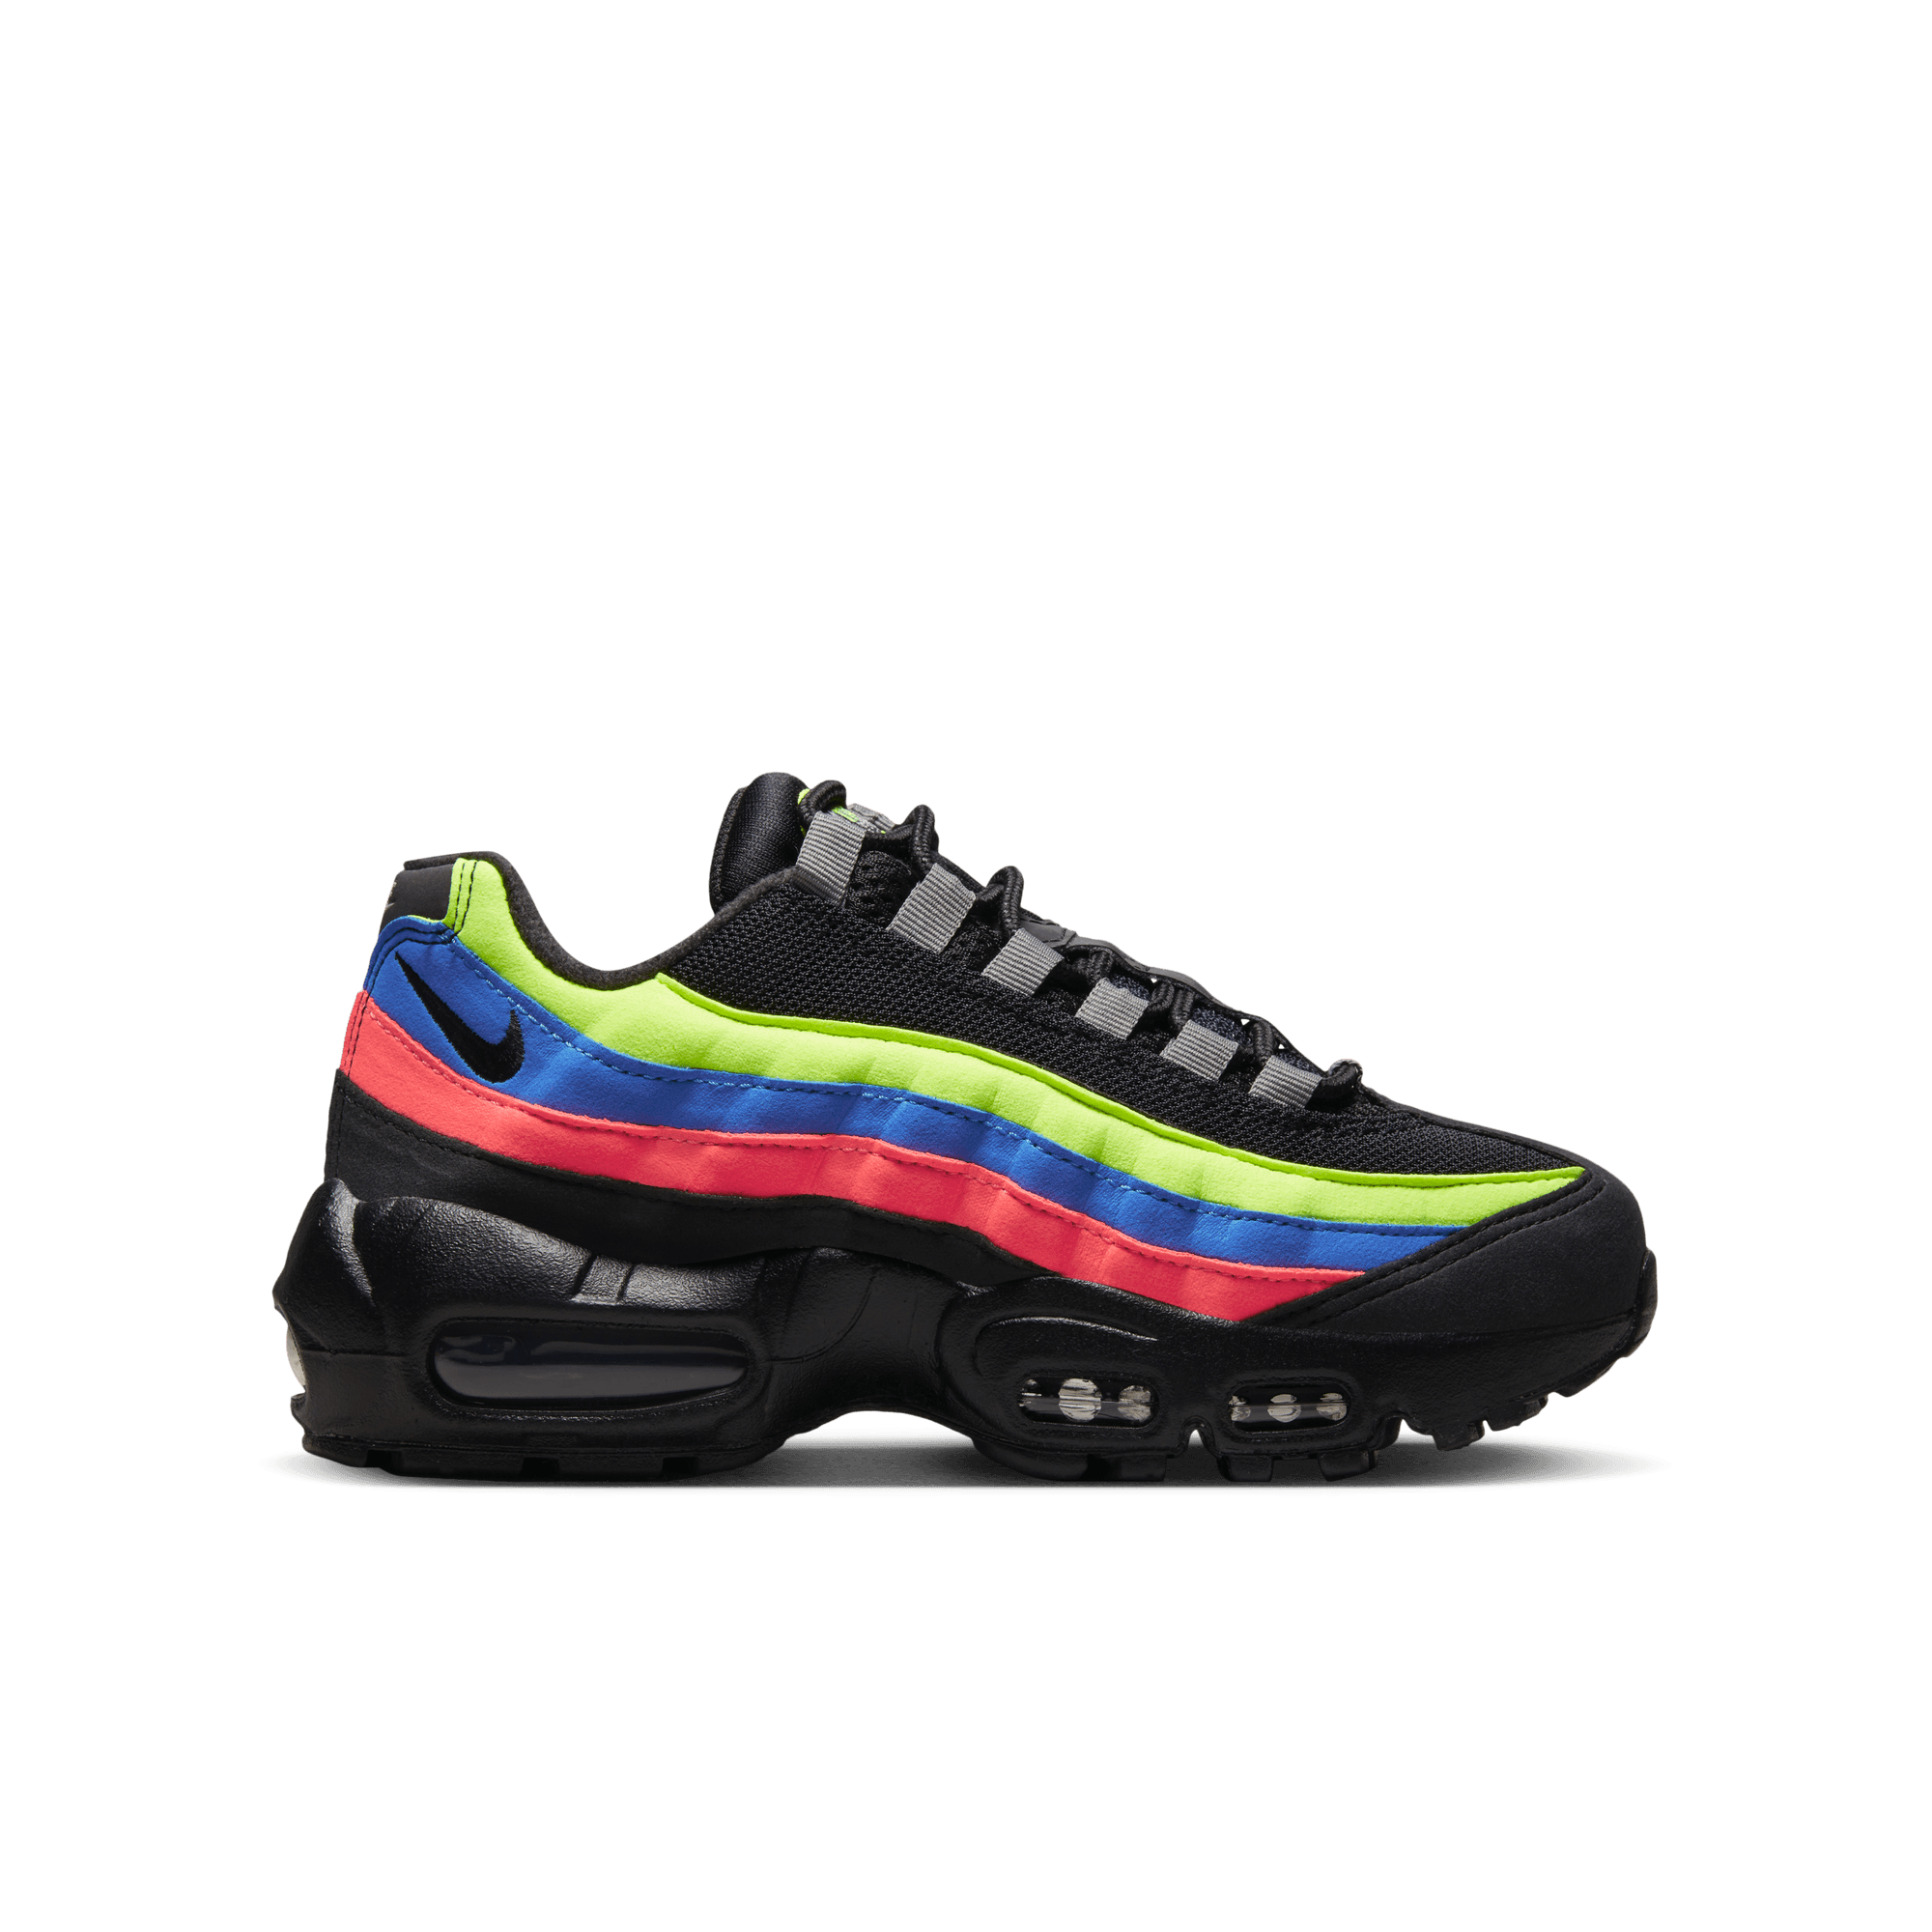 Three New Nike Air Max 95 Colorways with Unique Pull-tabs Release